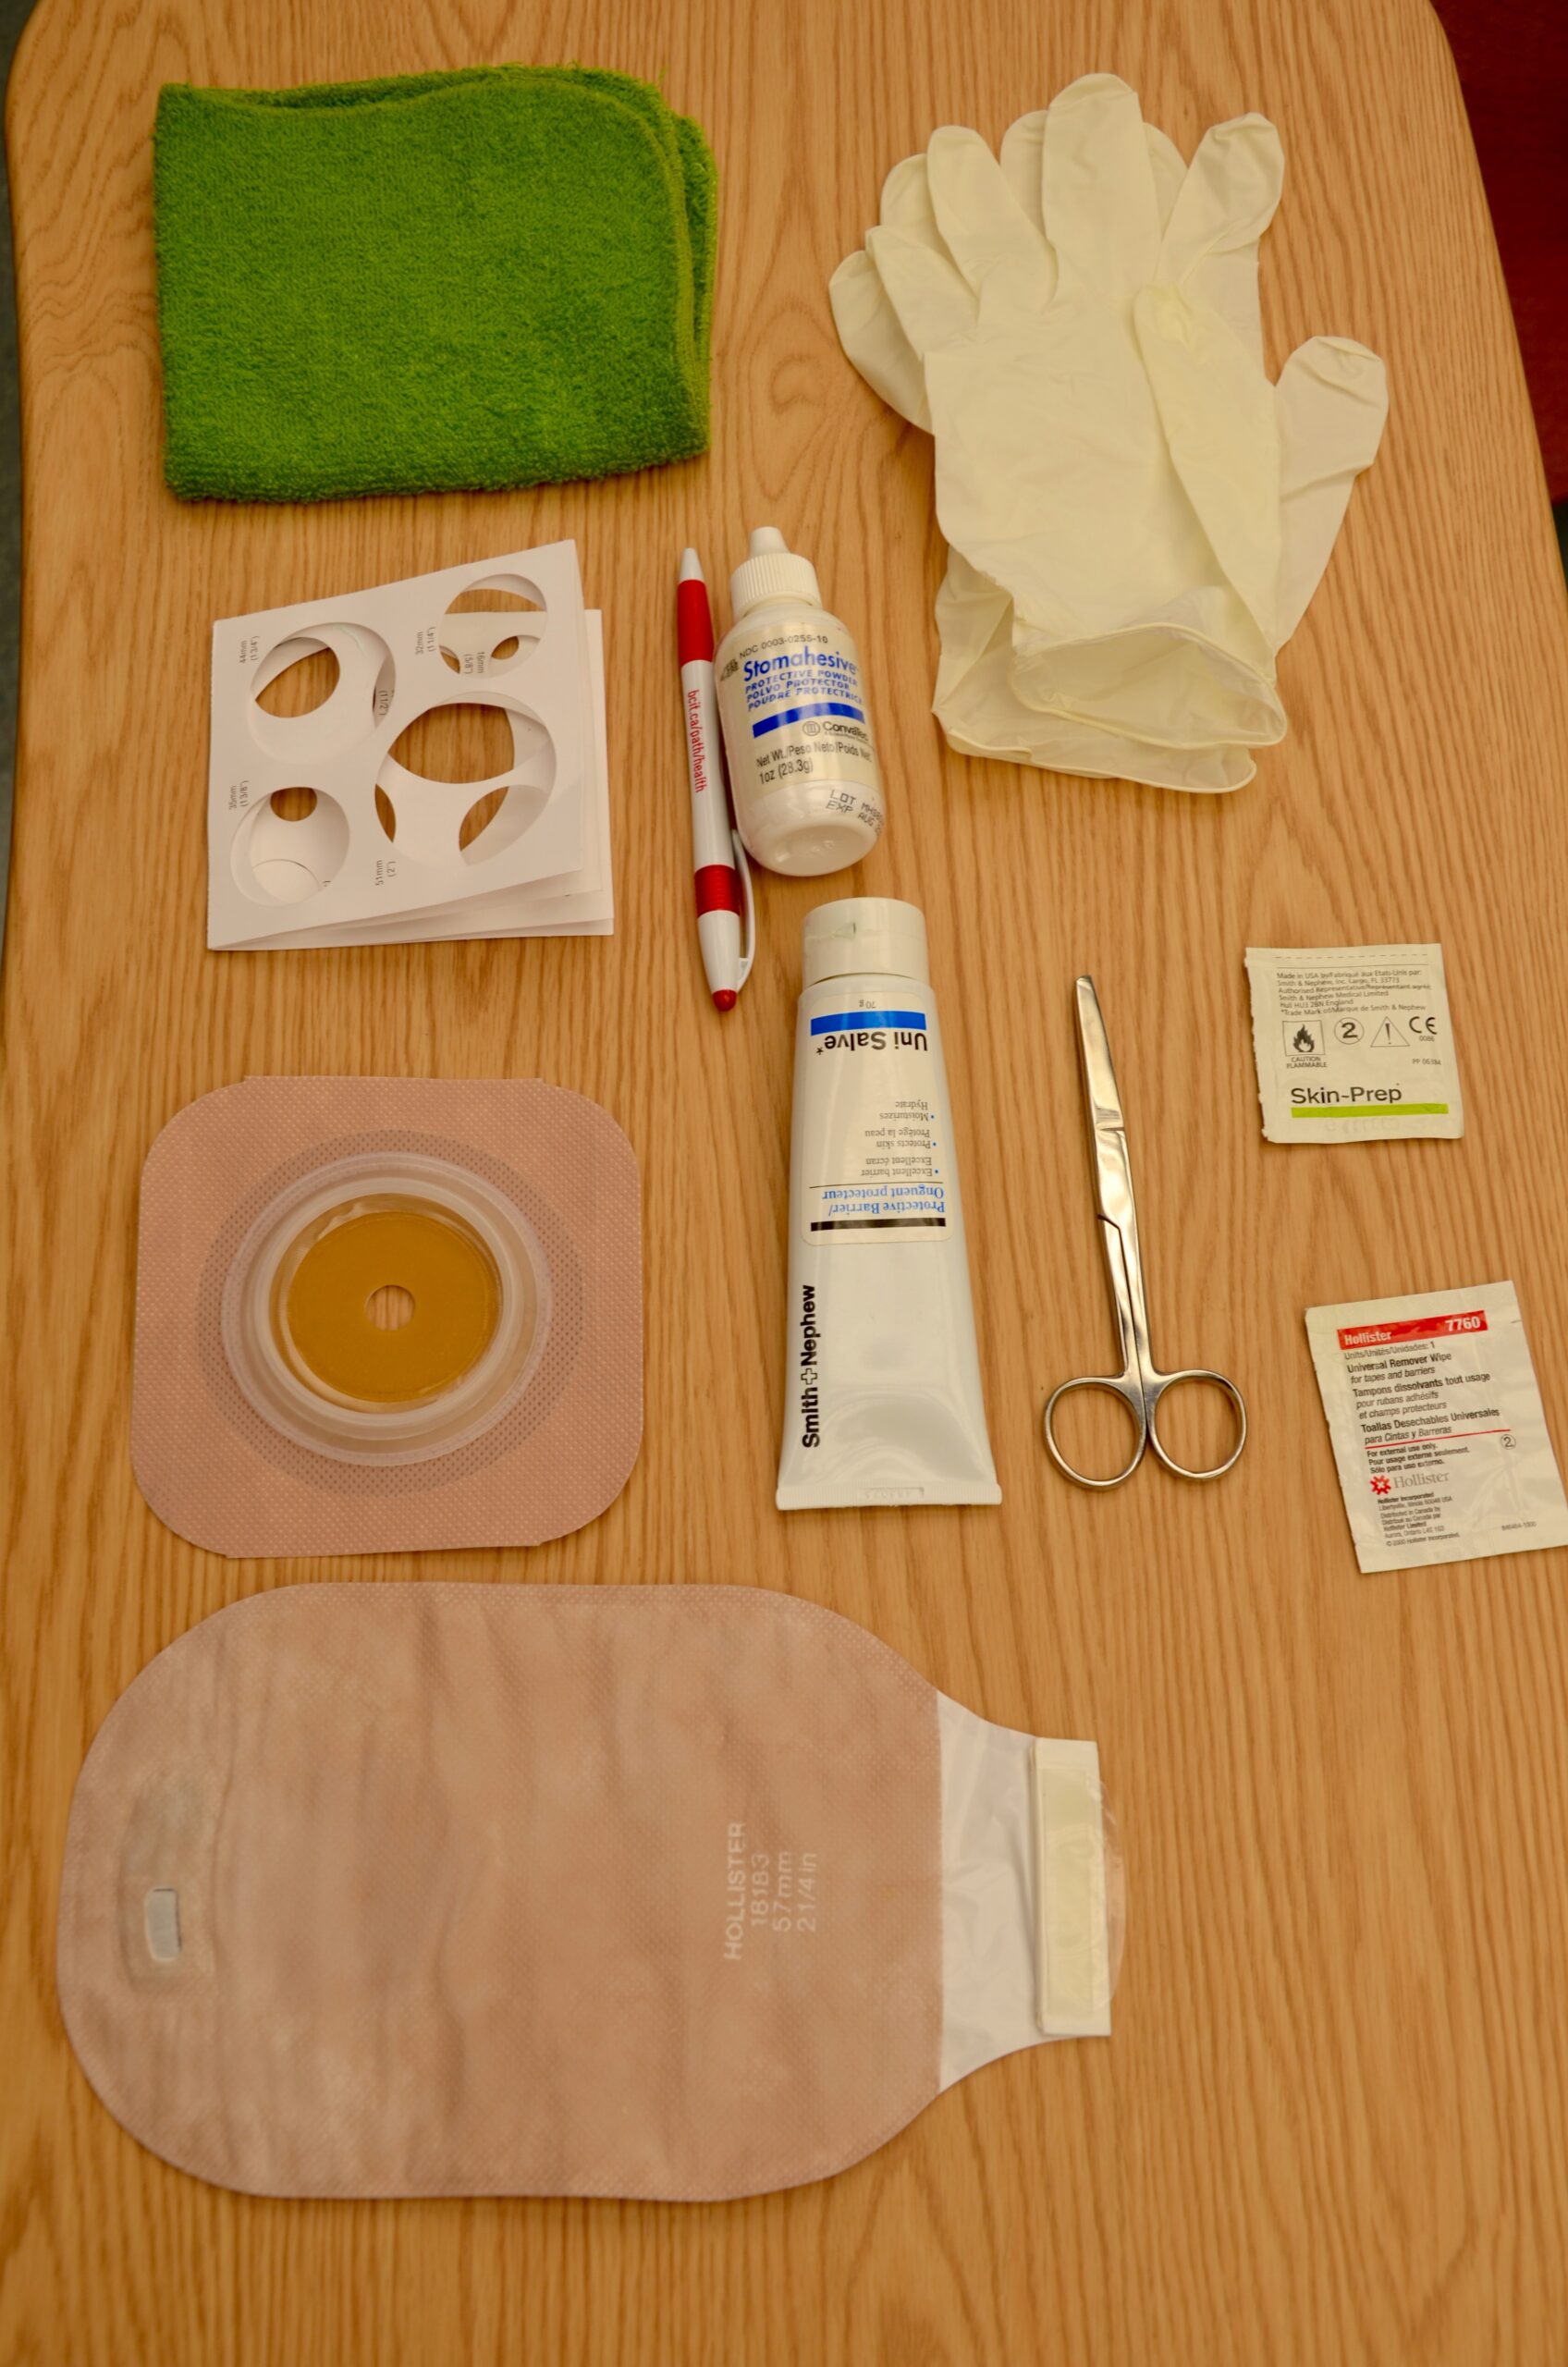 When can a HHA change a colostomy bag?